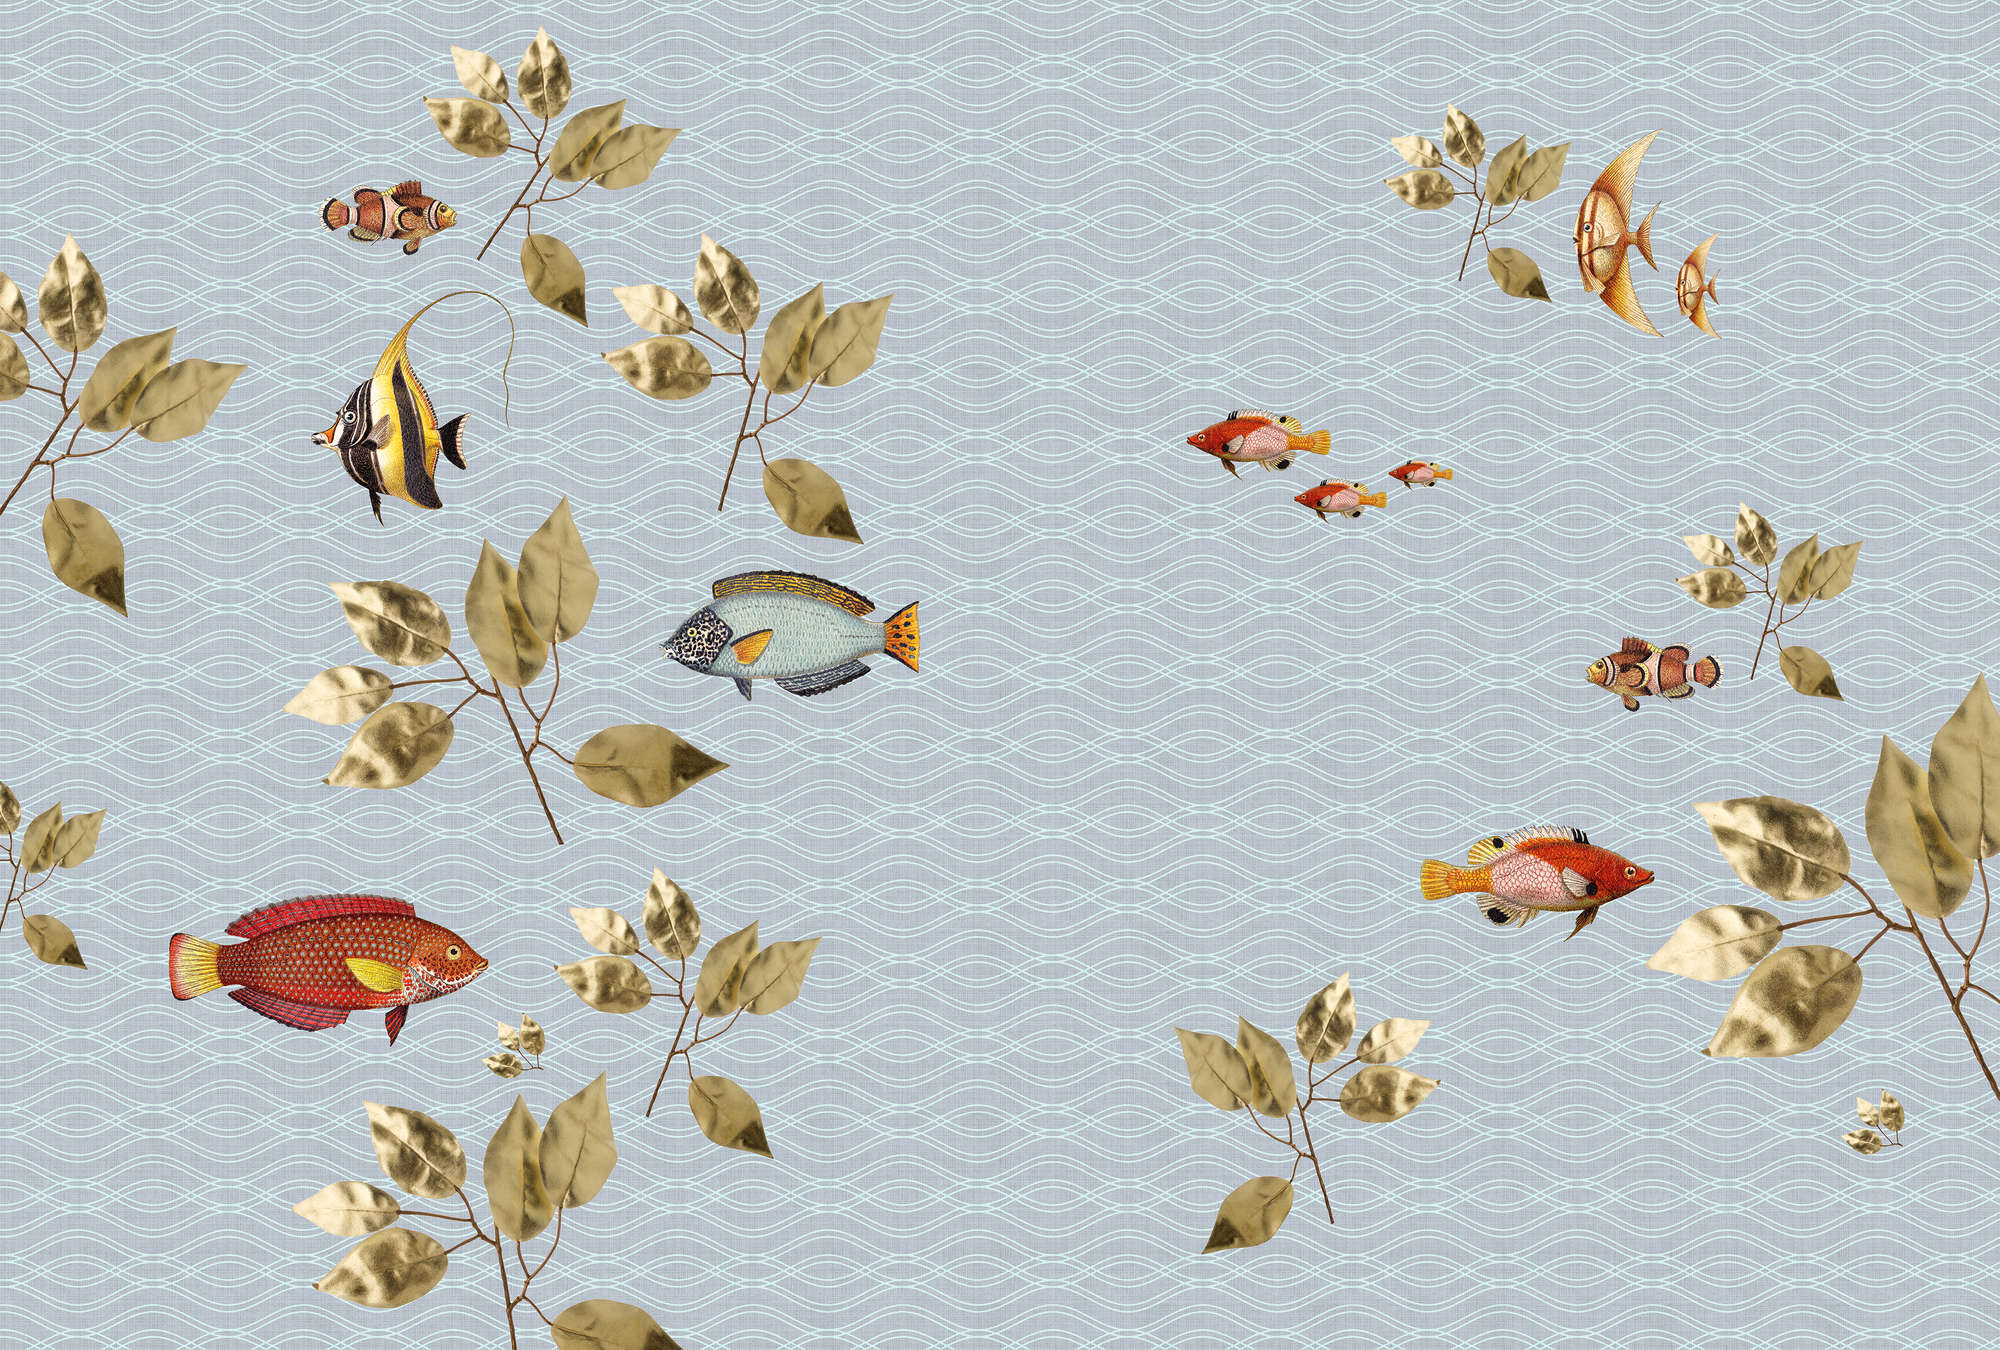             Brilliant fish 1 - Flying fish wallpaper in natural linen structure - Blue | Premium smooth fleece
        